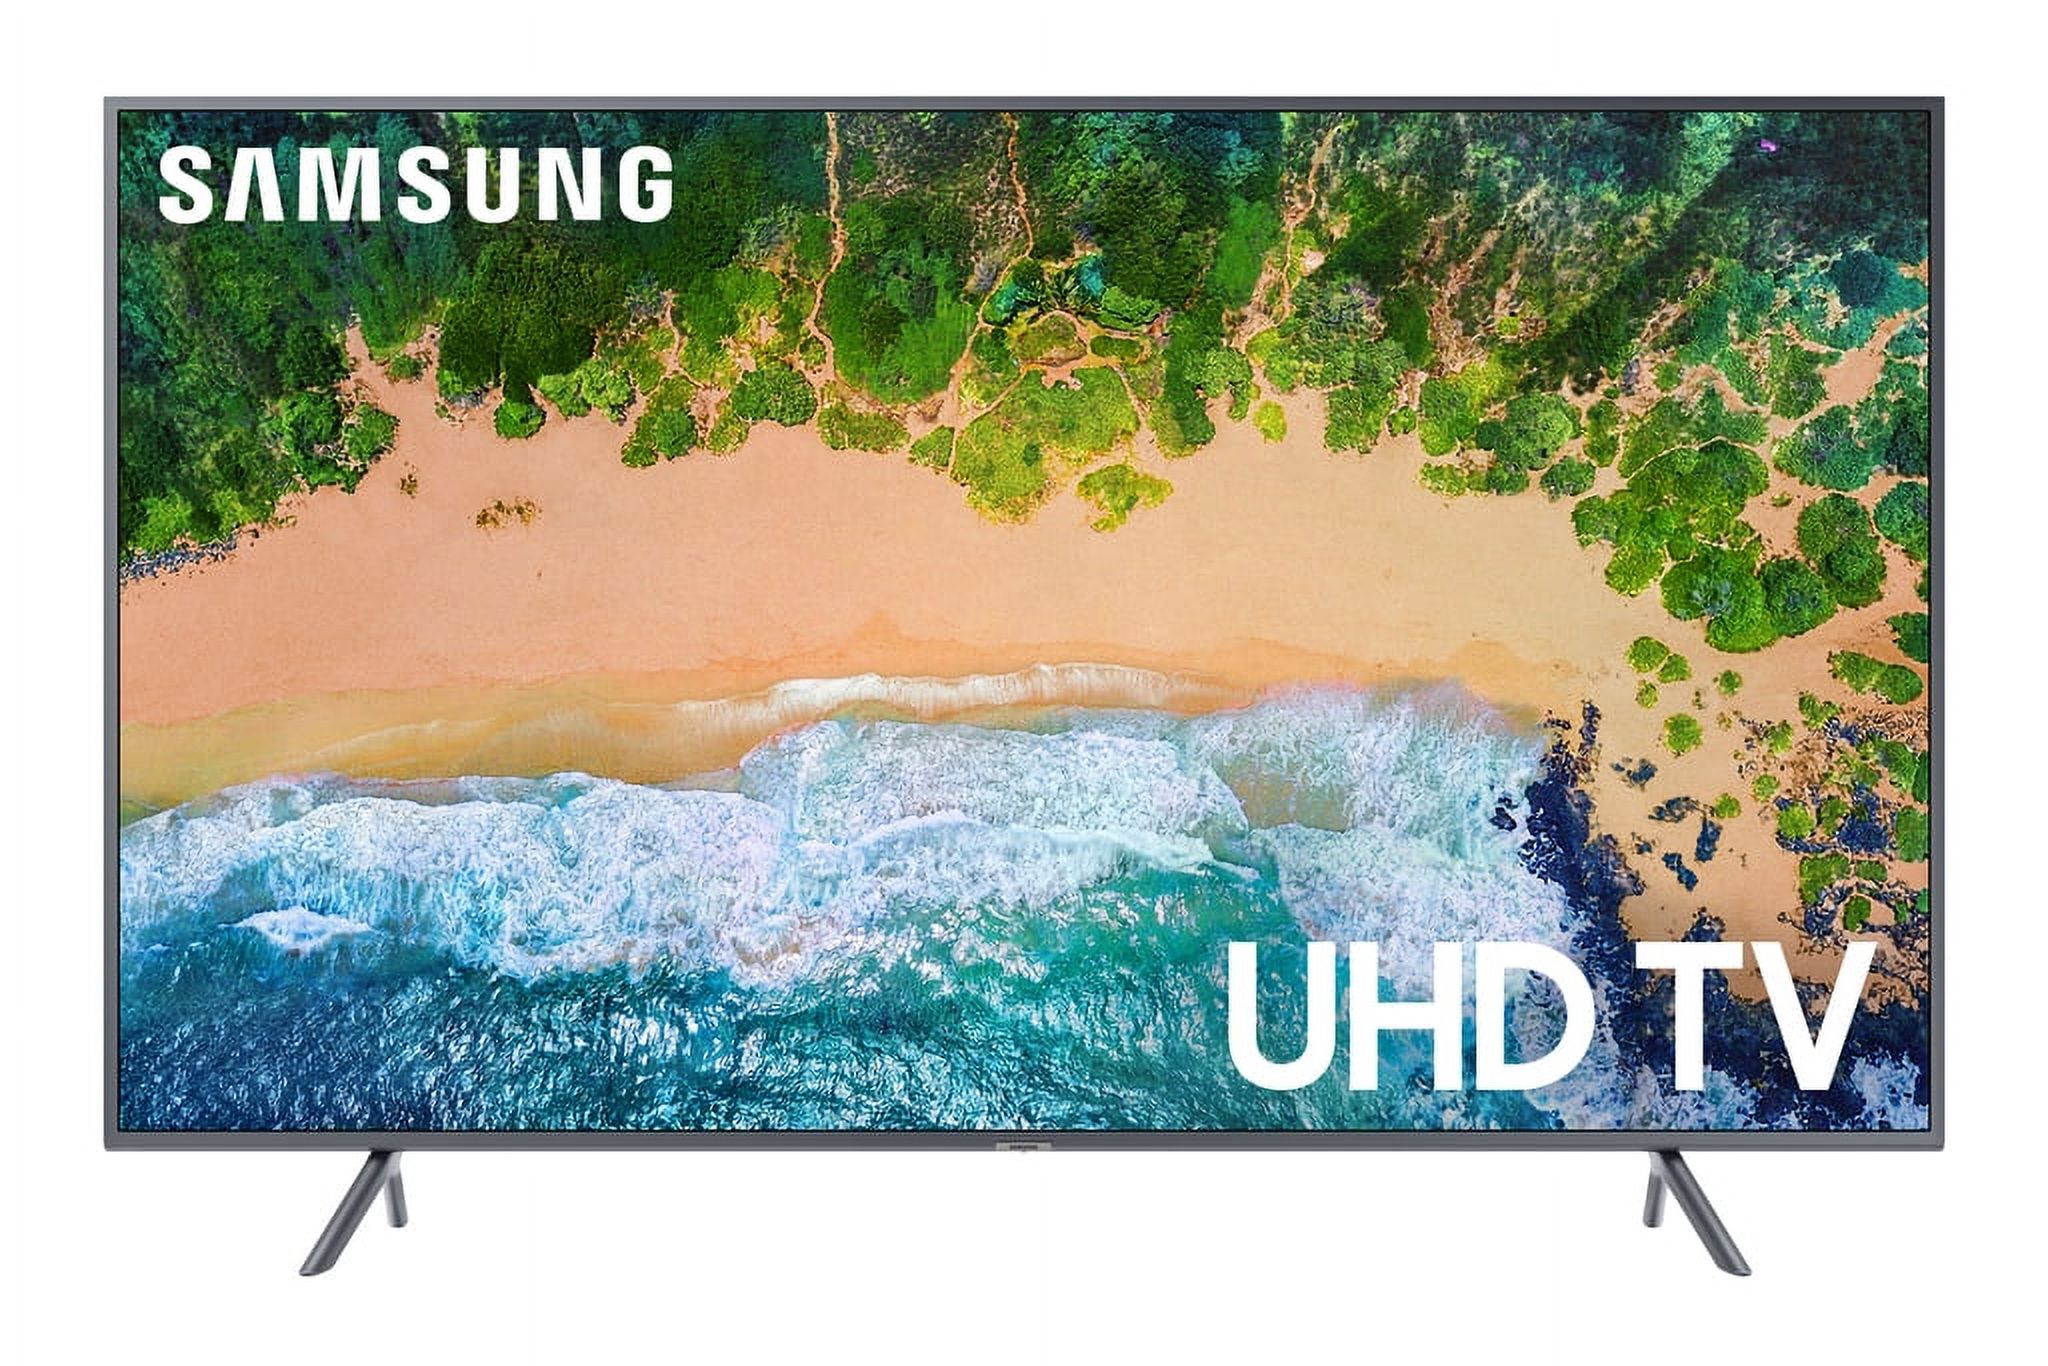 SAMSUNG 55" Class 4K (2160P) Ultra HD Smart LED HDR TV UN55NU7200 with $20 VUDU Credit - image 1 of 14